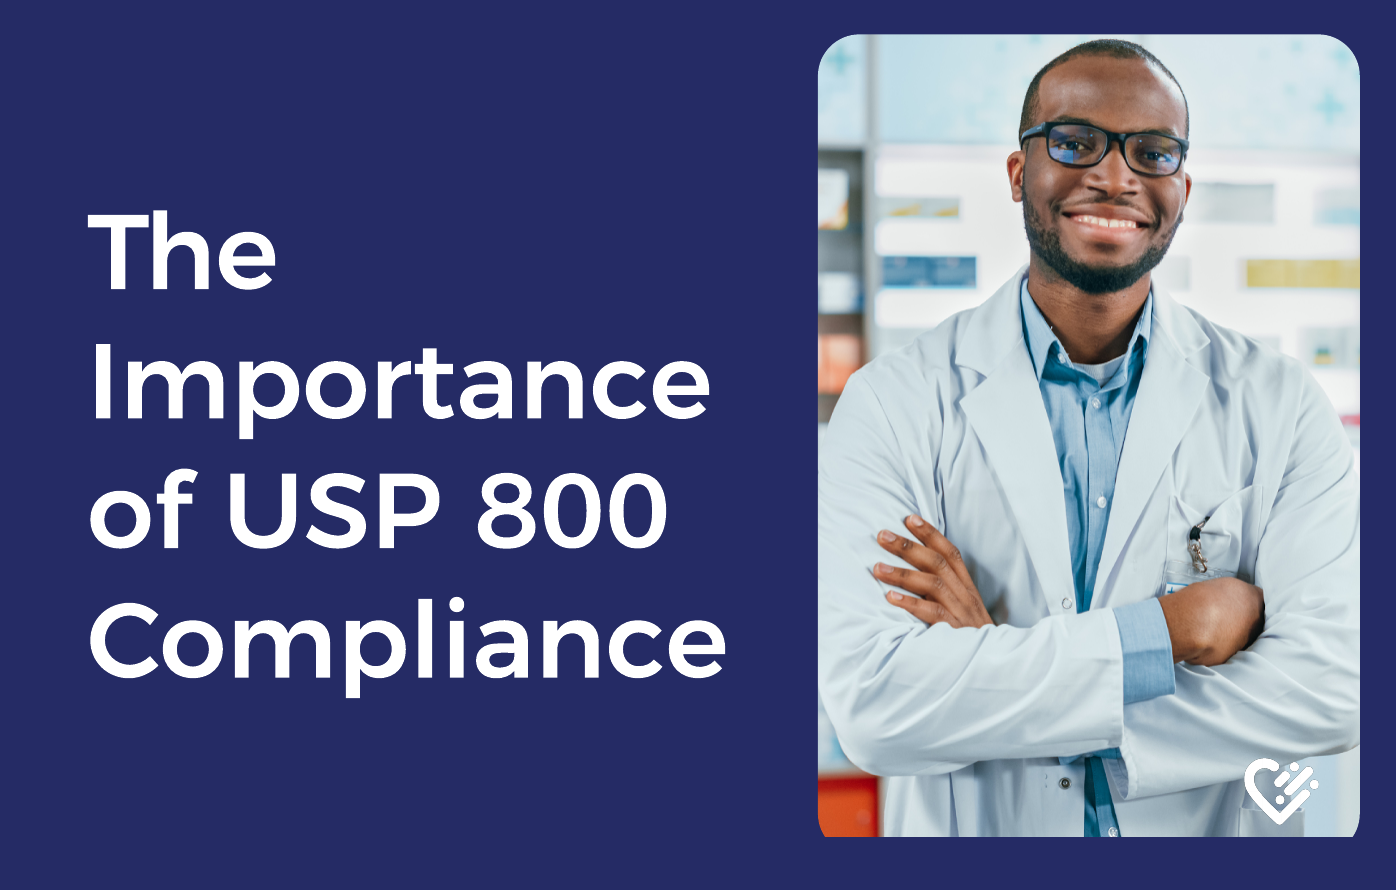 The Importance of USP 800 Compliance